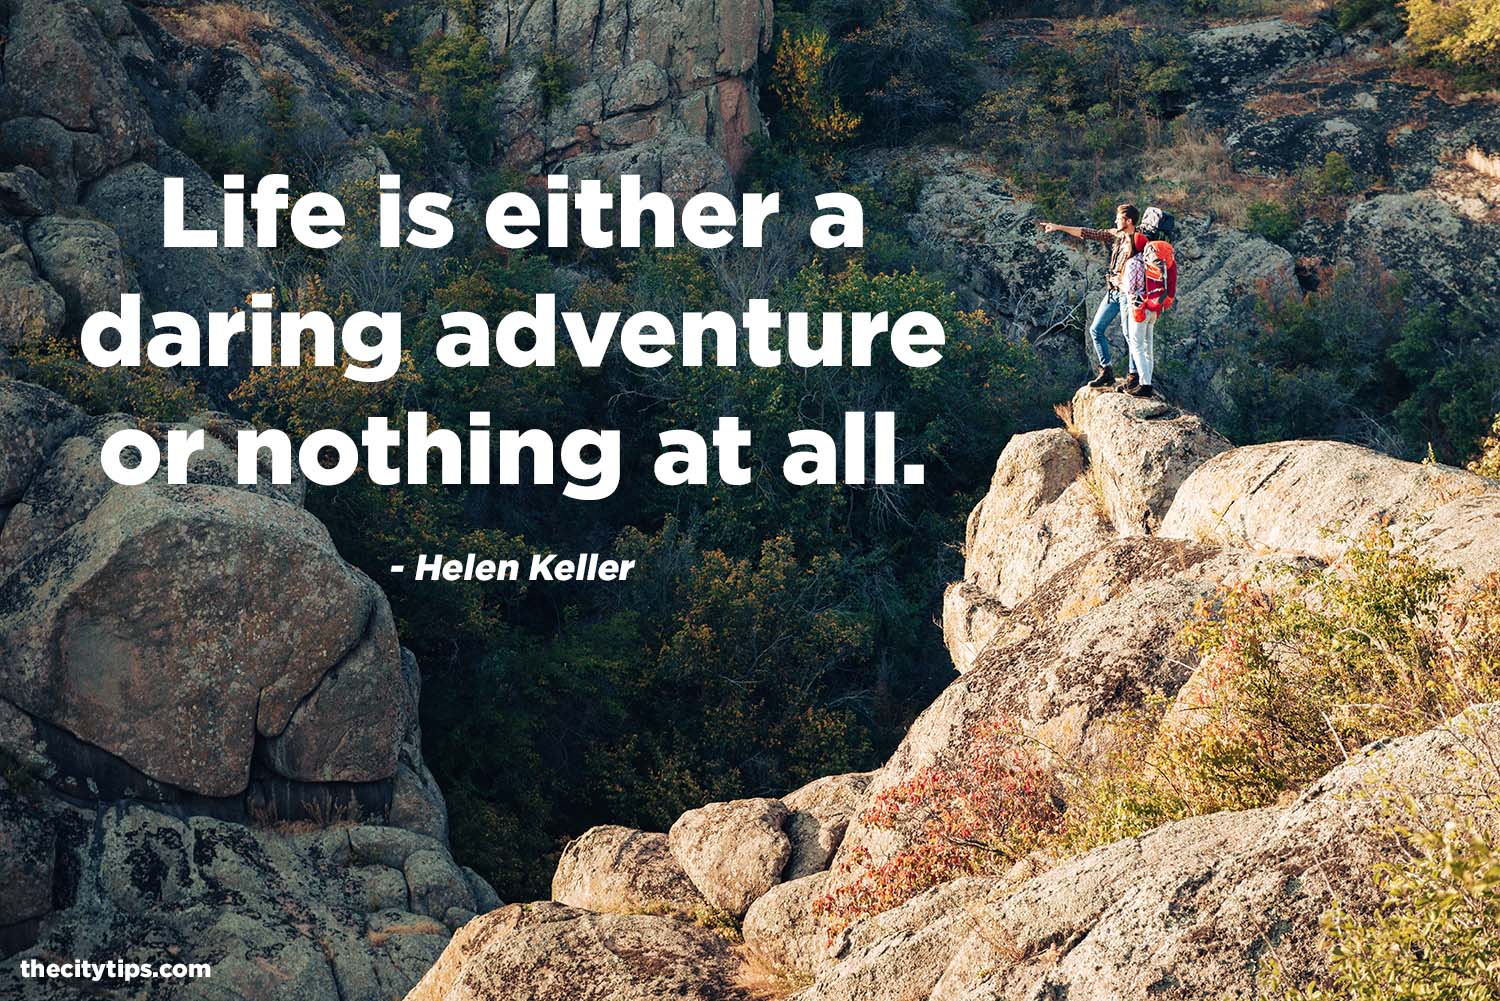 "Life is either a daring adventure or nothing at all." by Helen Keller